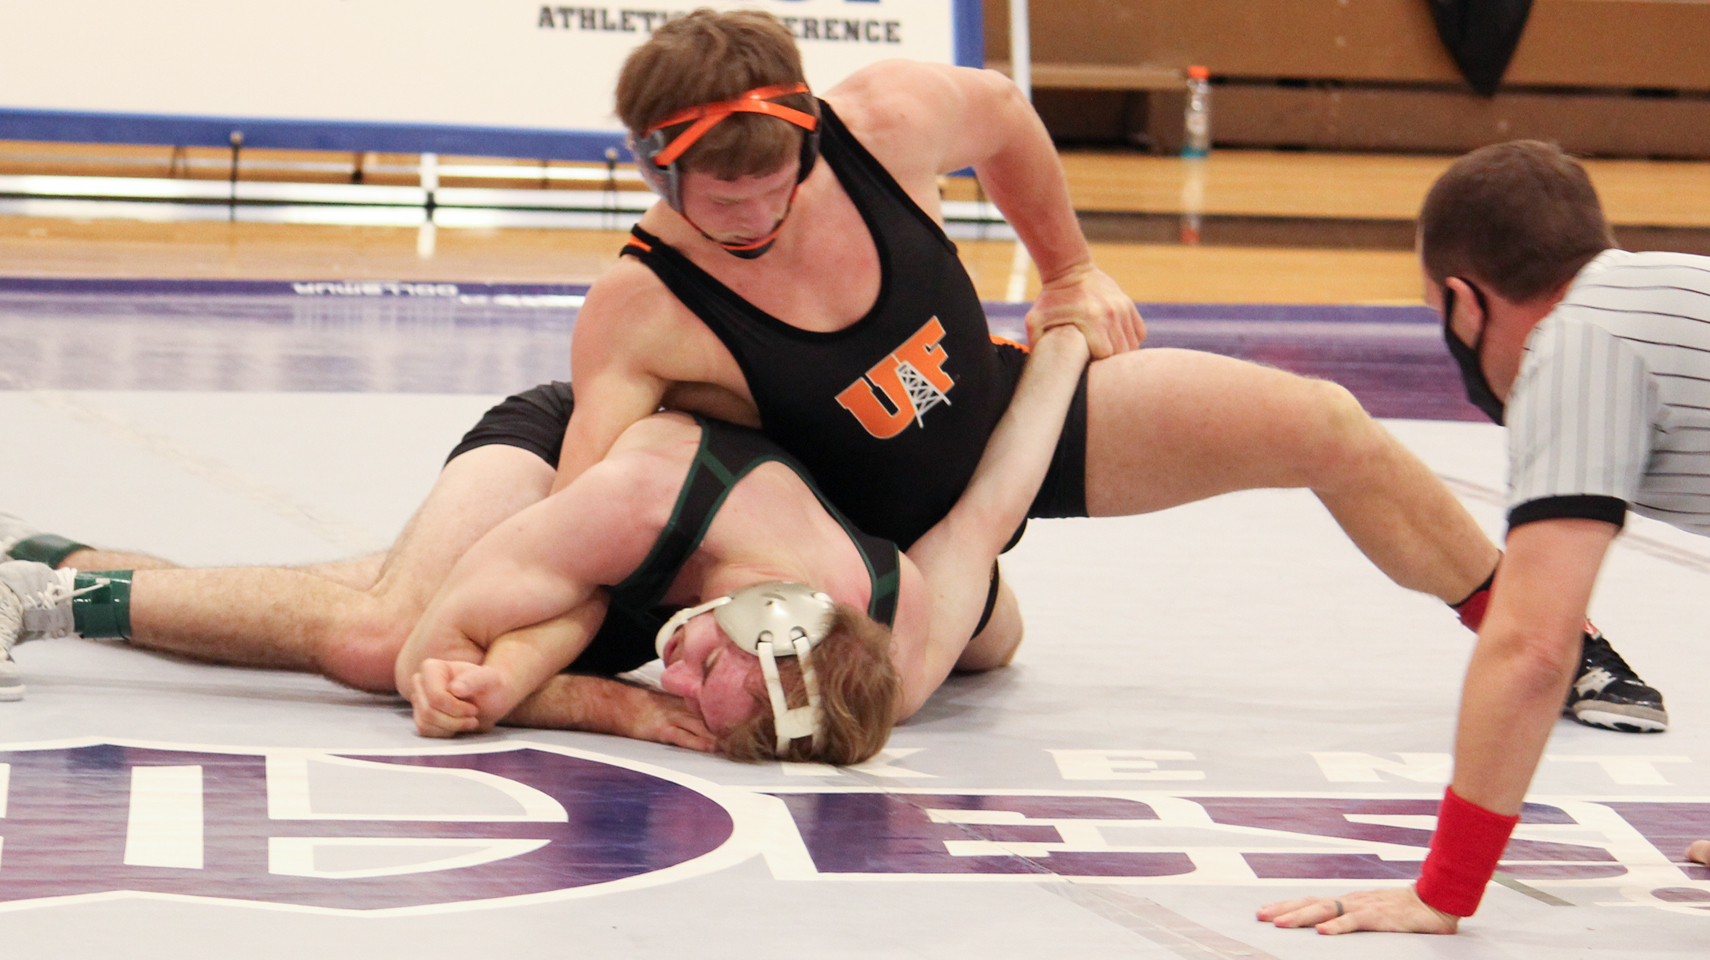 Wrestler forcing an opponent into the mat